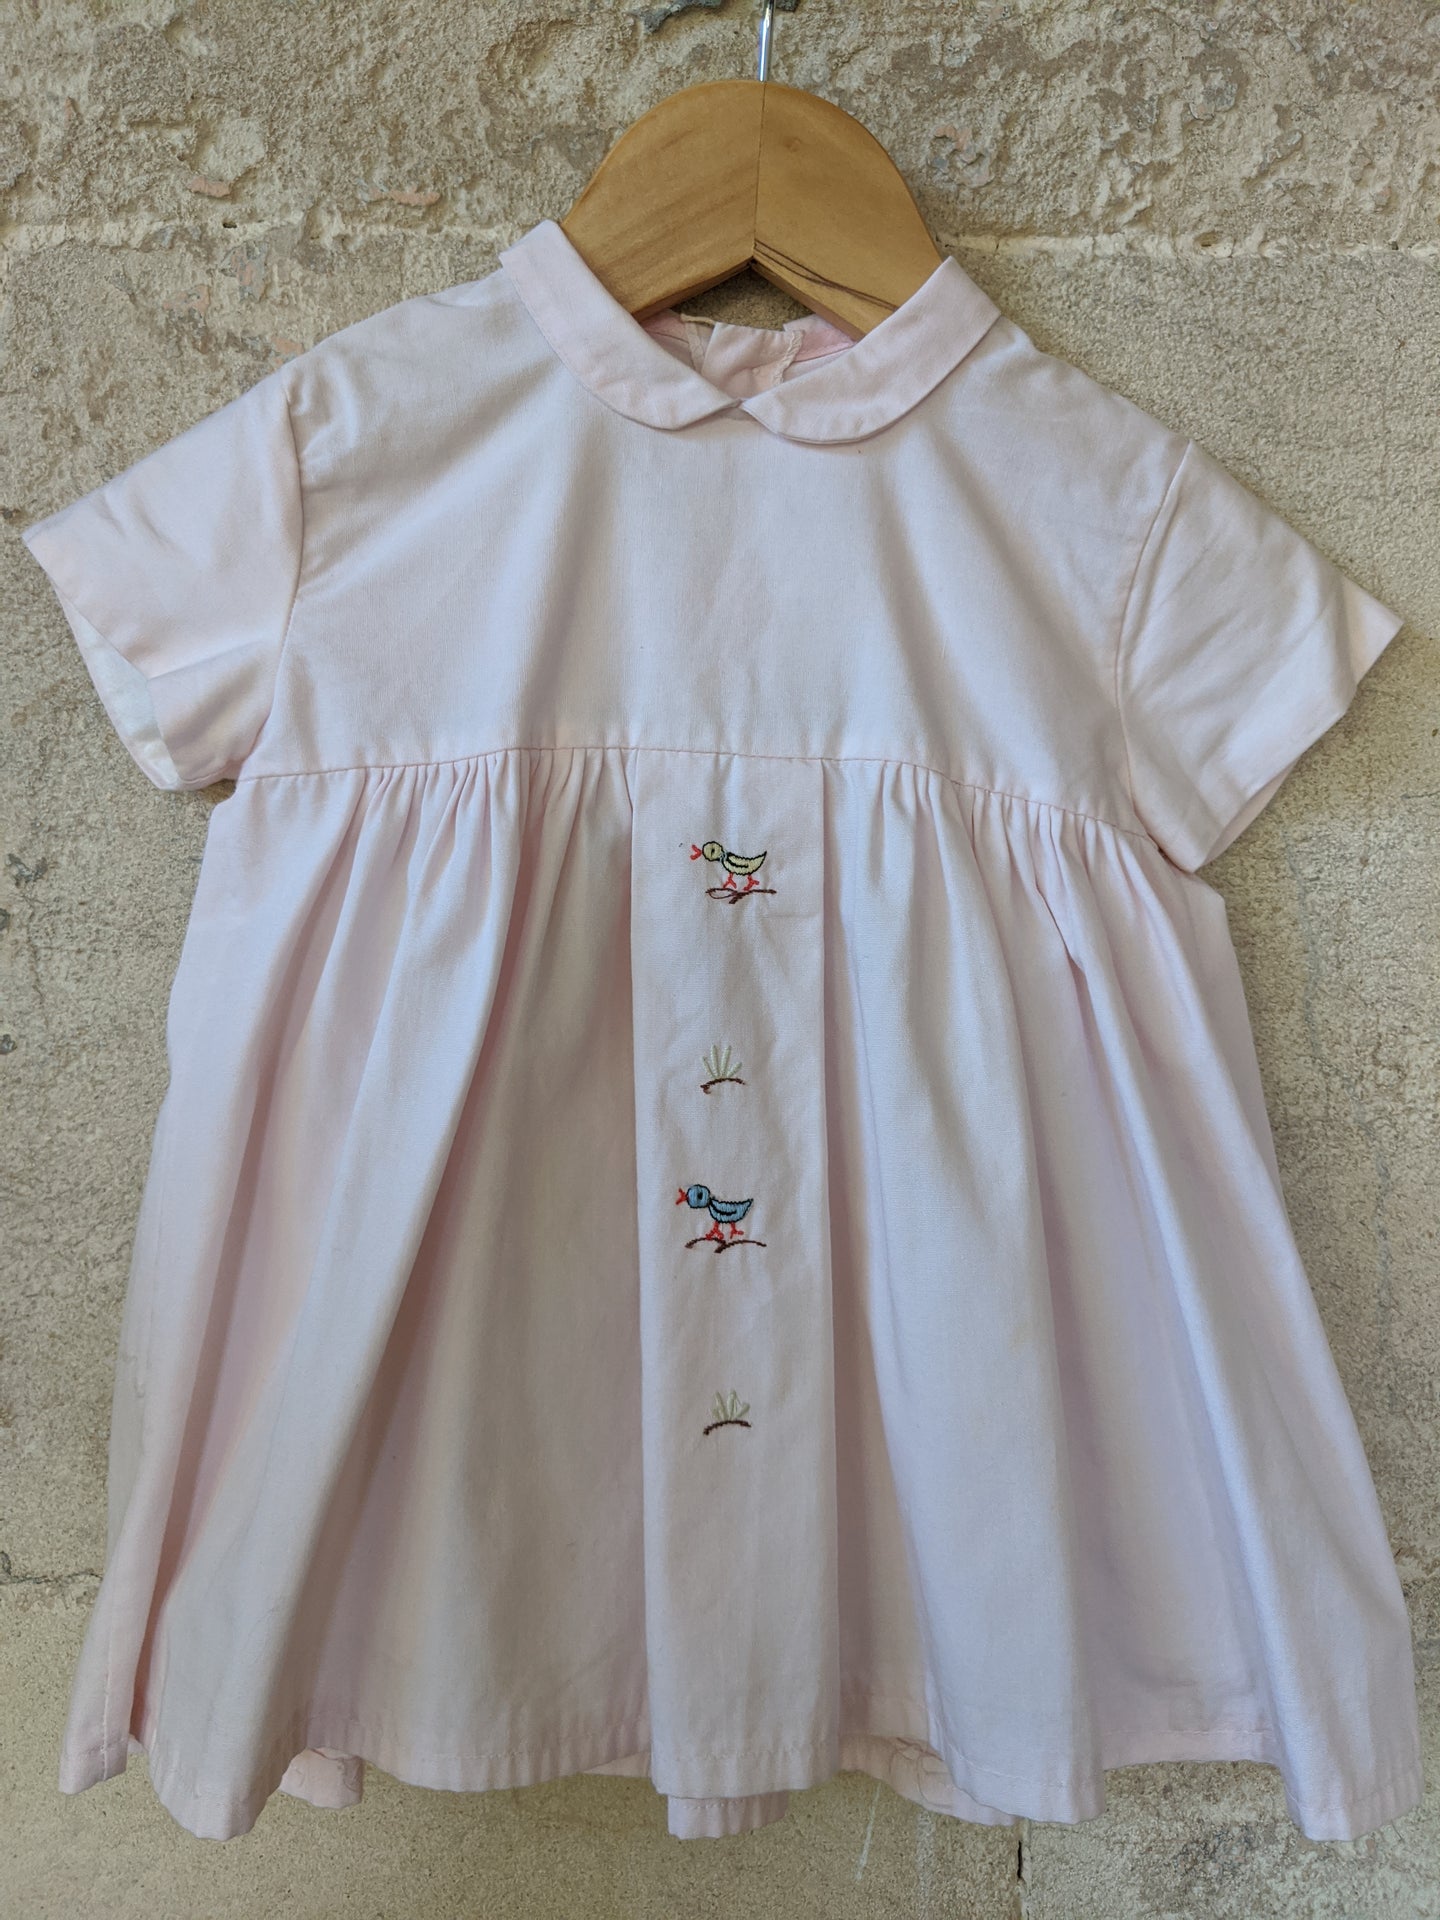 Beautiful Antique Cotton Dress with Sweet Embroidery - 3 Months